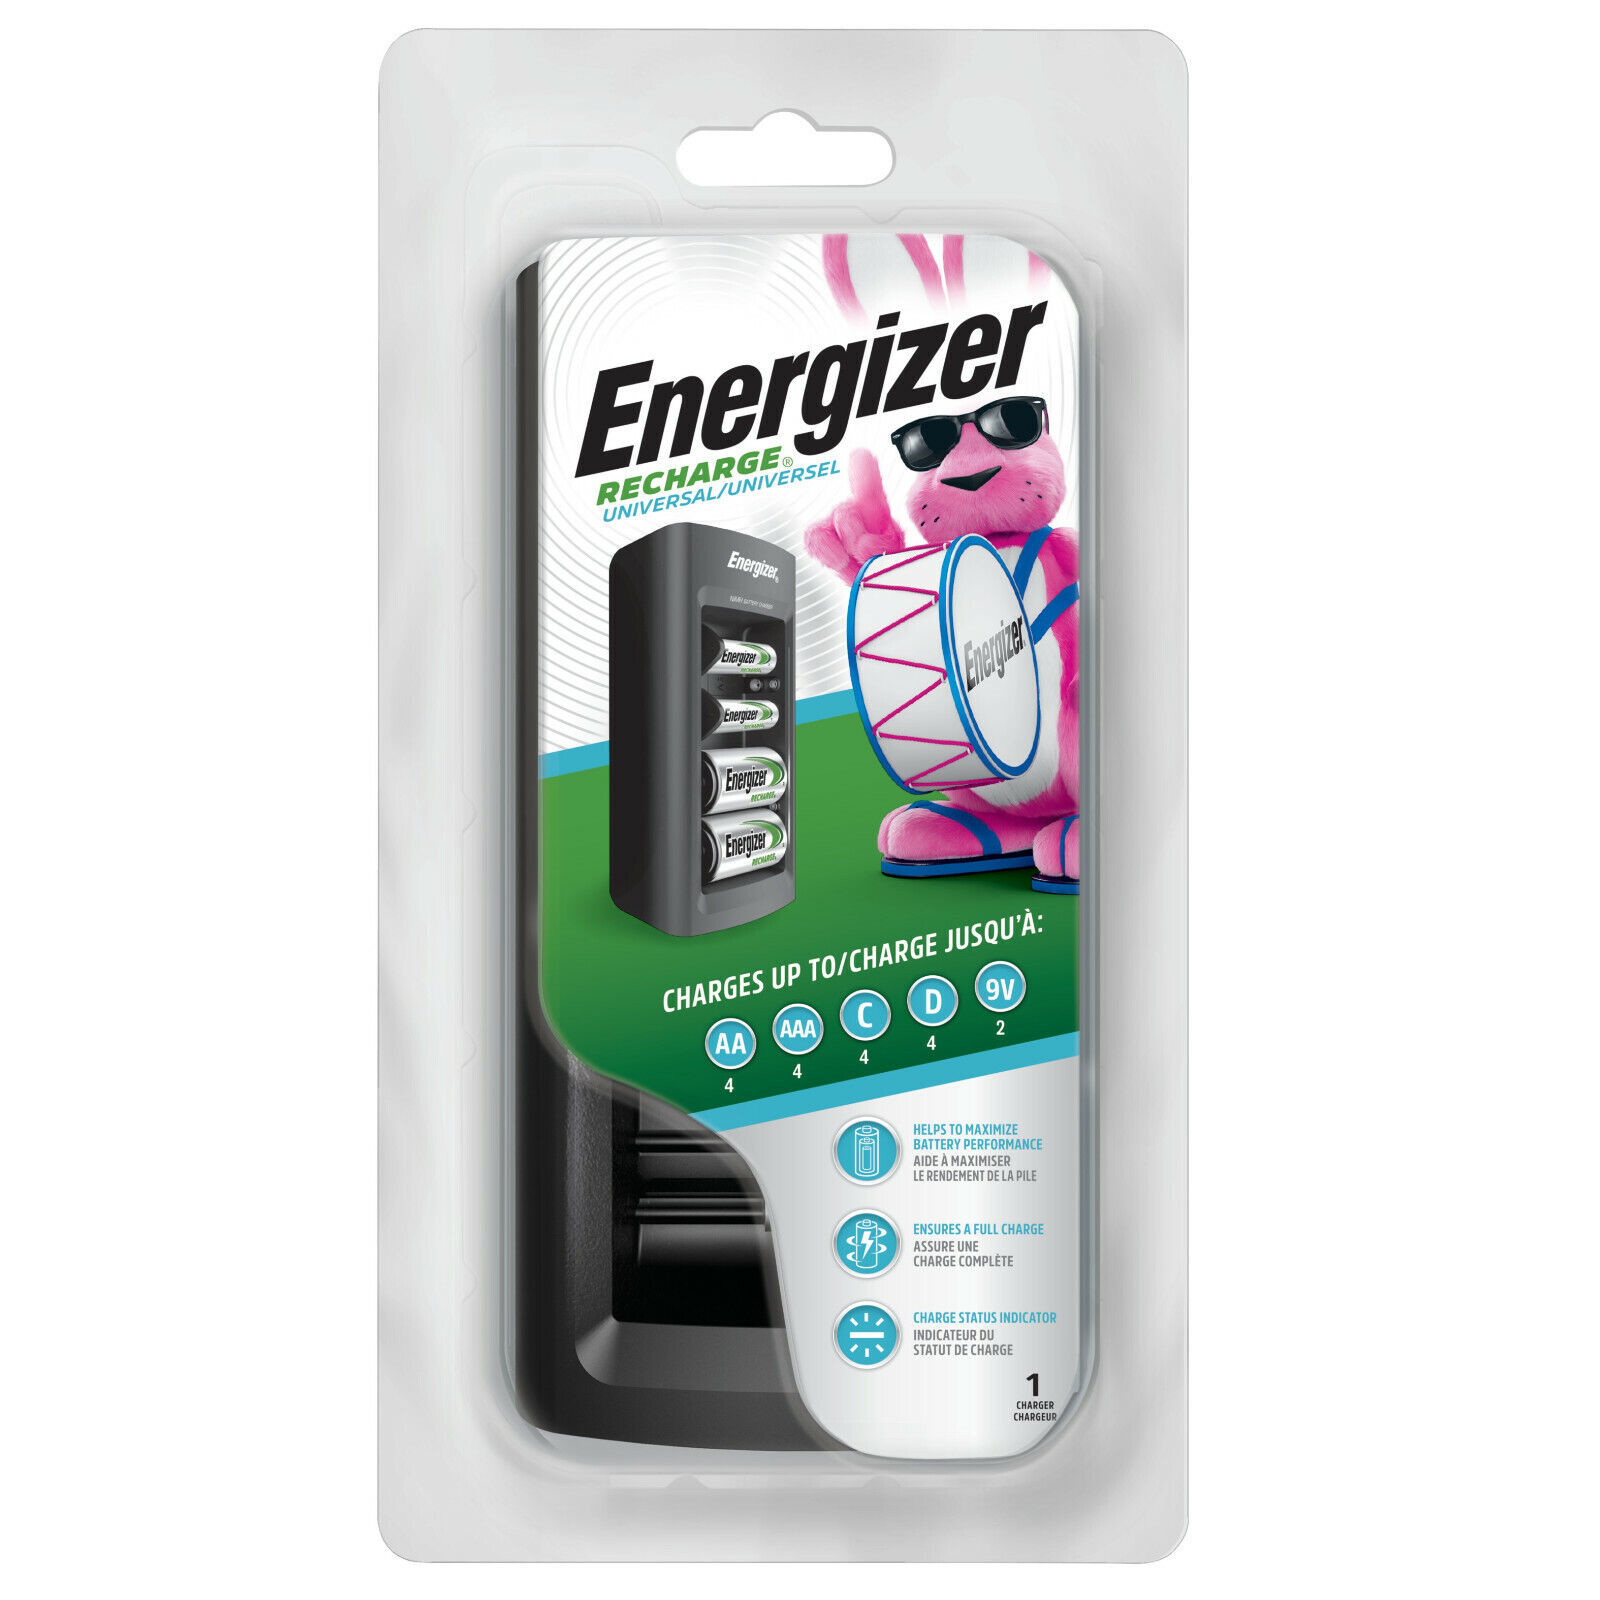 Energizer Universal NiMH Battery Charger for AA AAA C D 9V (model CHFC 3) Energizer CHFC3